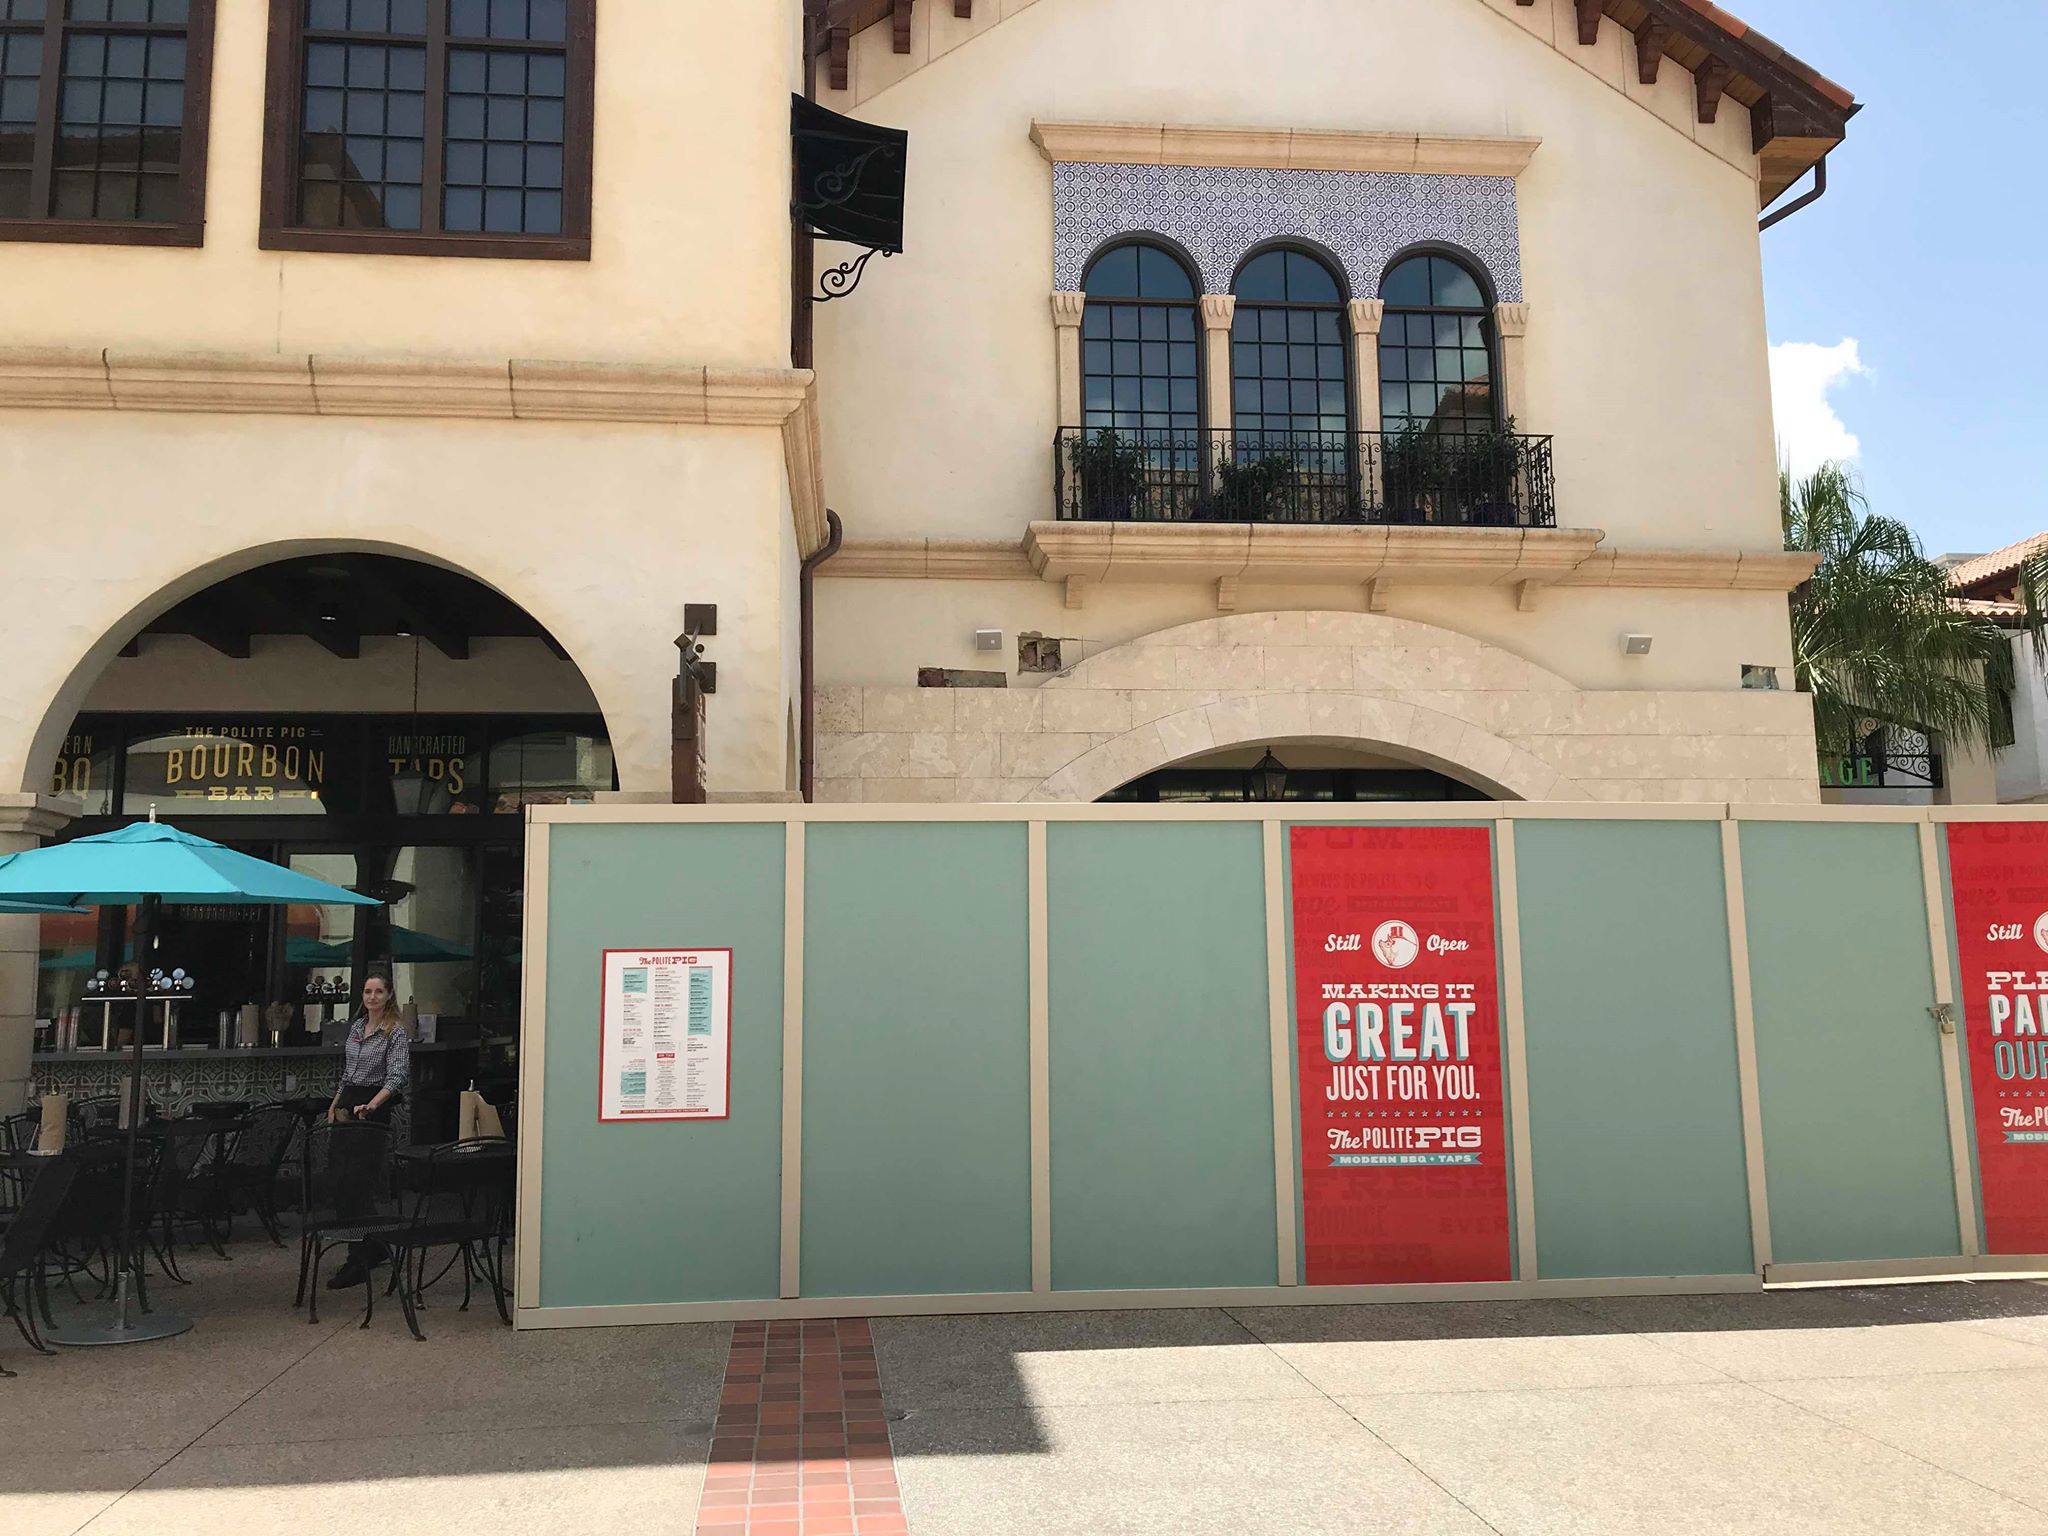 Additional Covered Outdoor Seating Coming to The Polite Pig